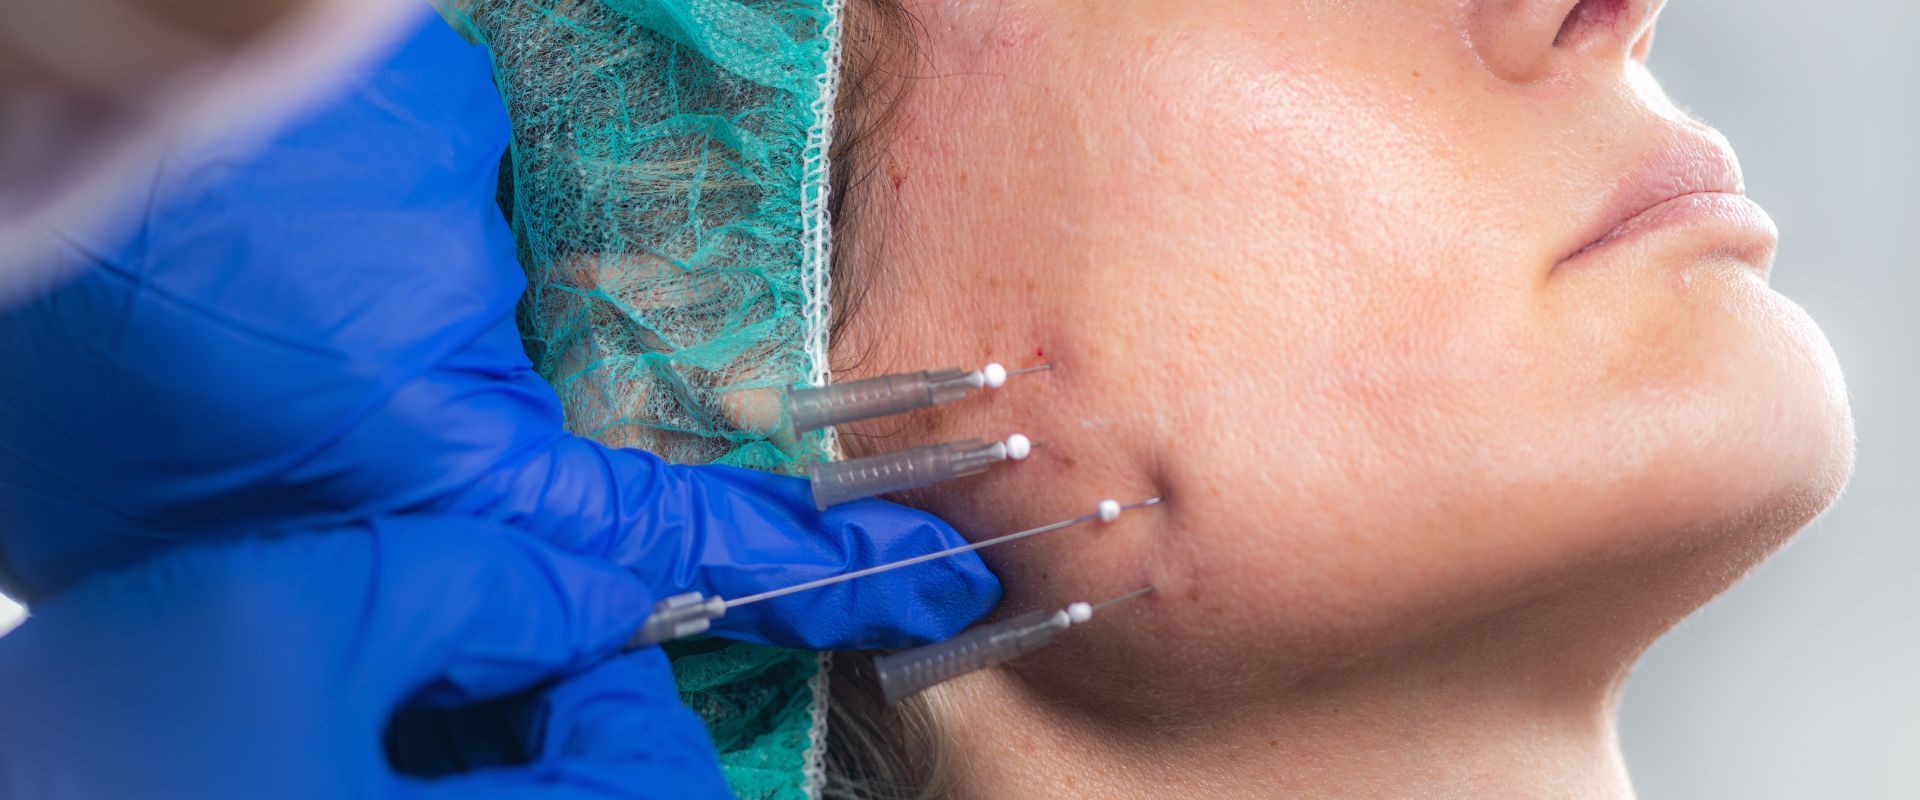 Smooth and barbed pdo threads to address skin sagging